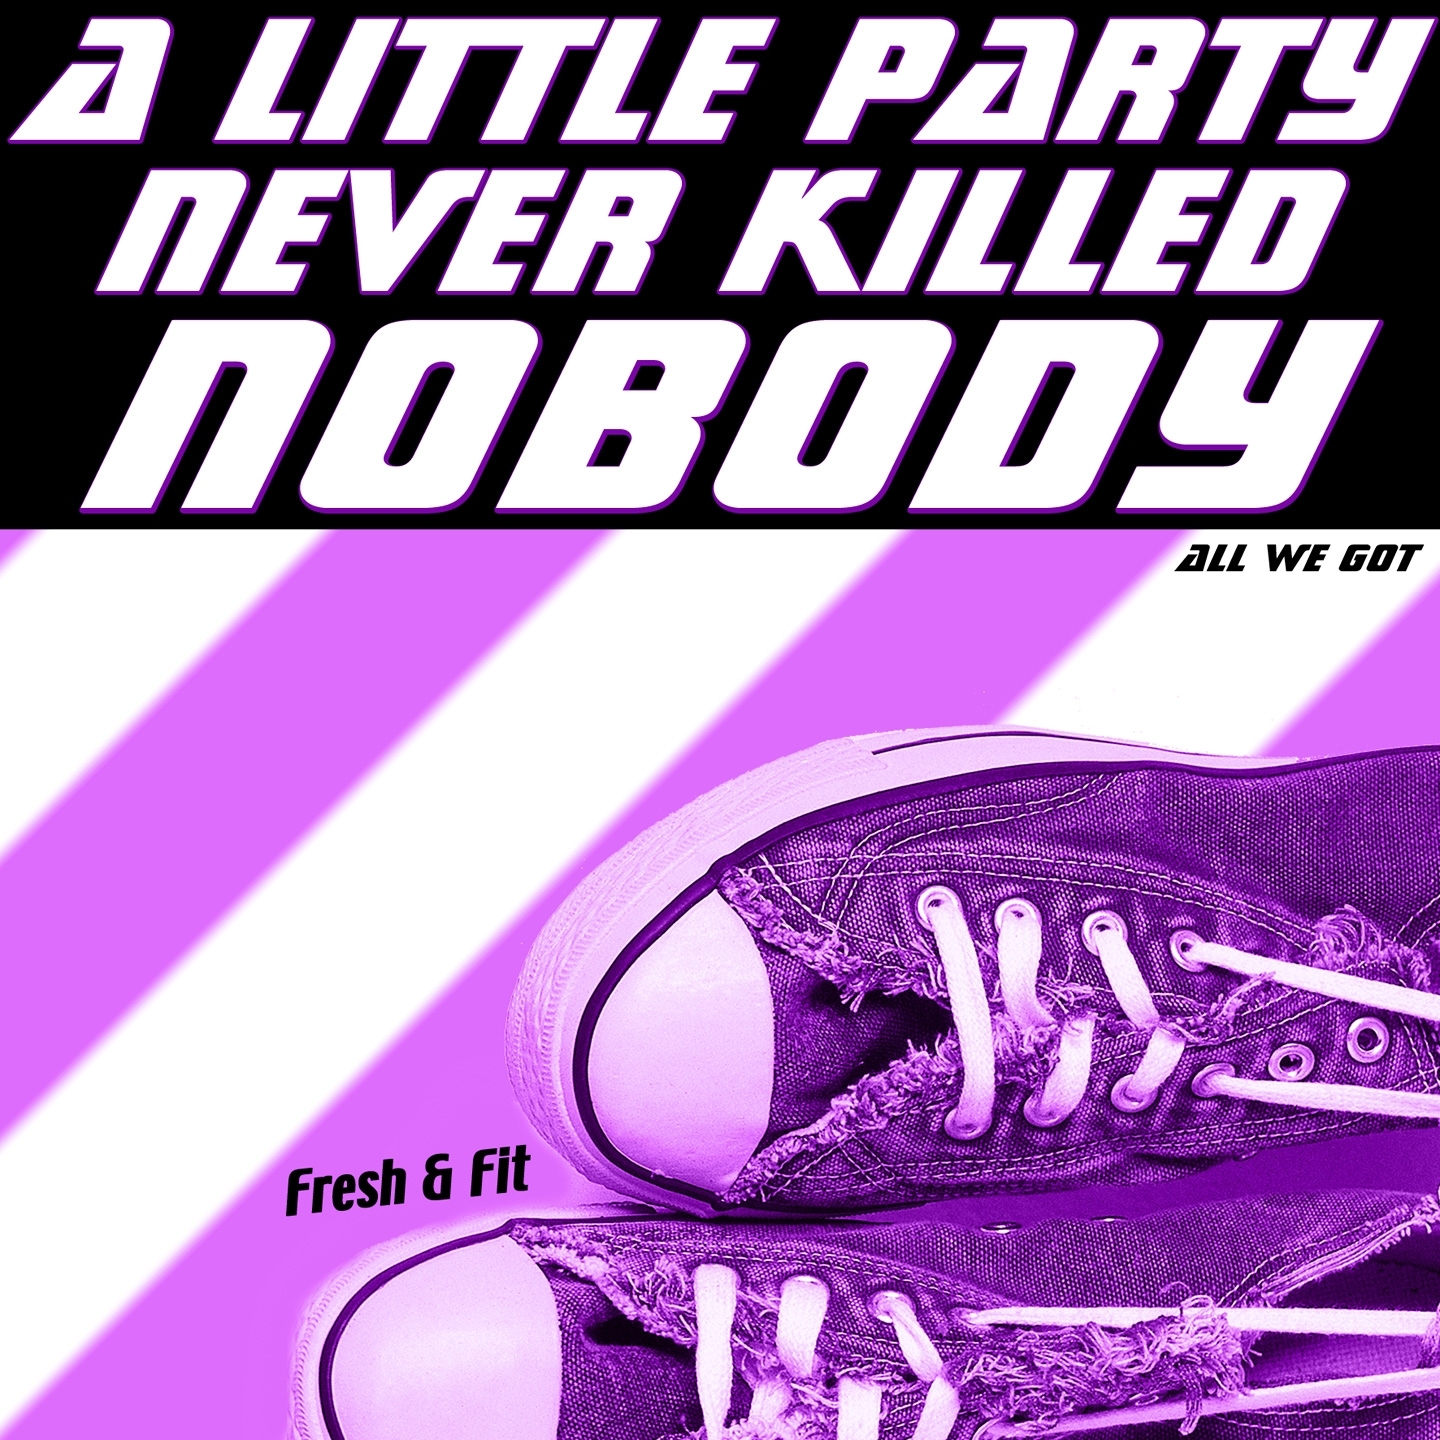 A Little Party Never Killed Nobody (All We Got)